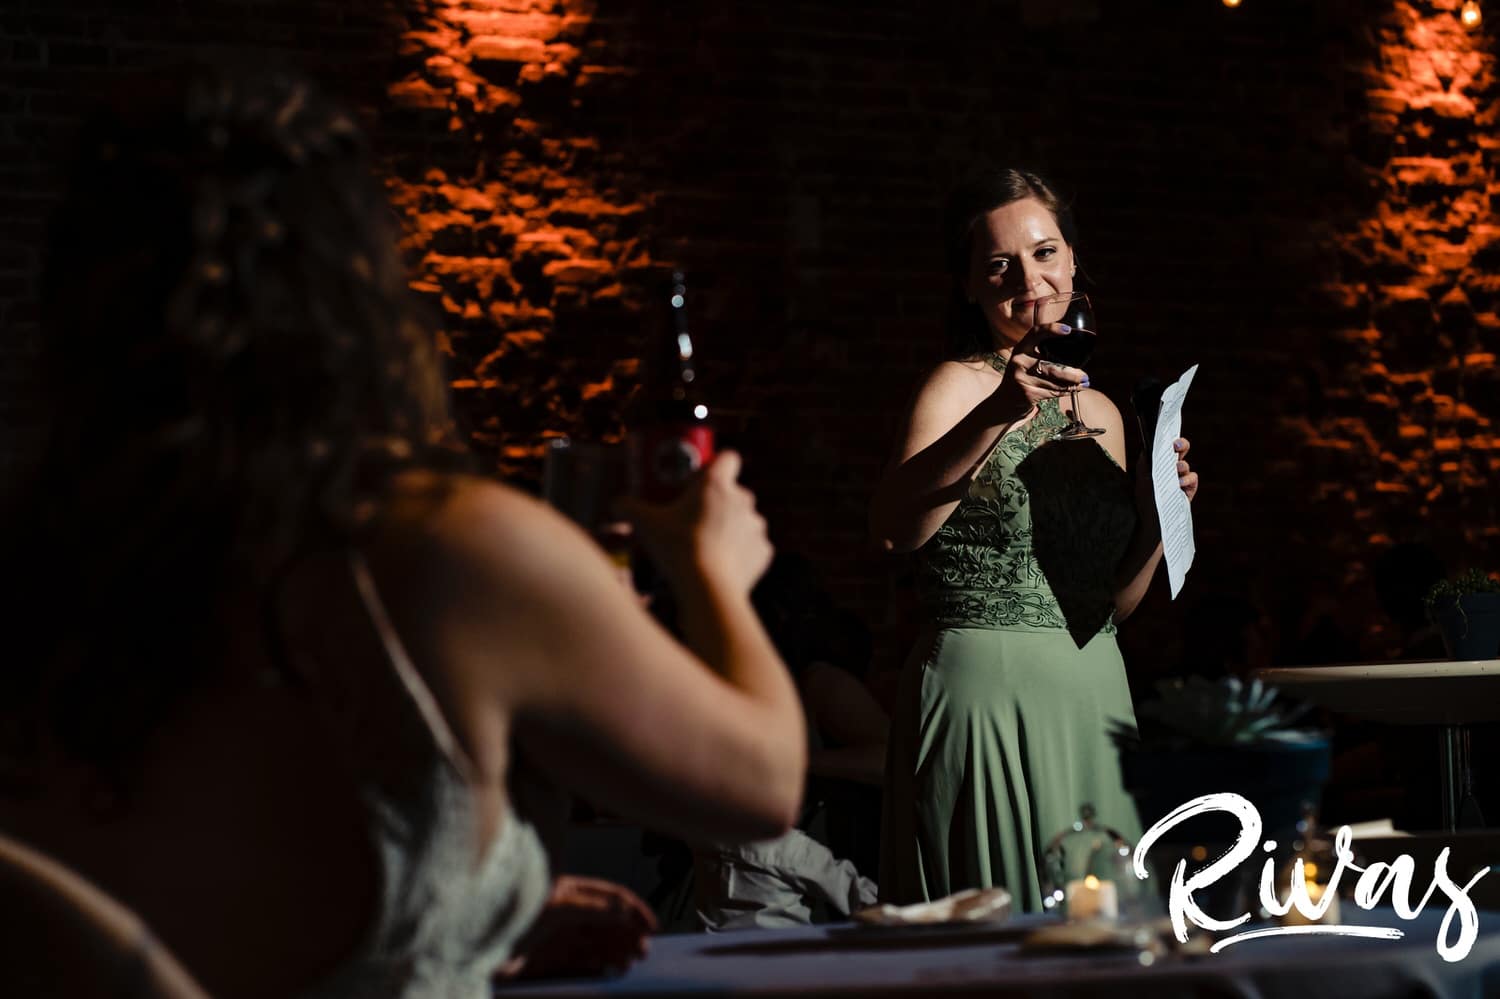 A candid picture taken over the shoulder of a bride as she is toasted during a fall wedding reception at The Foundation event Space. 